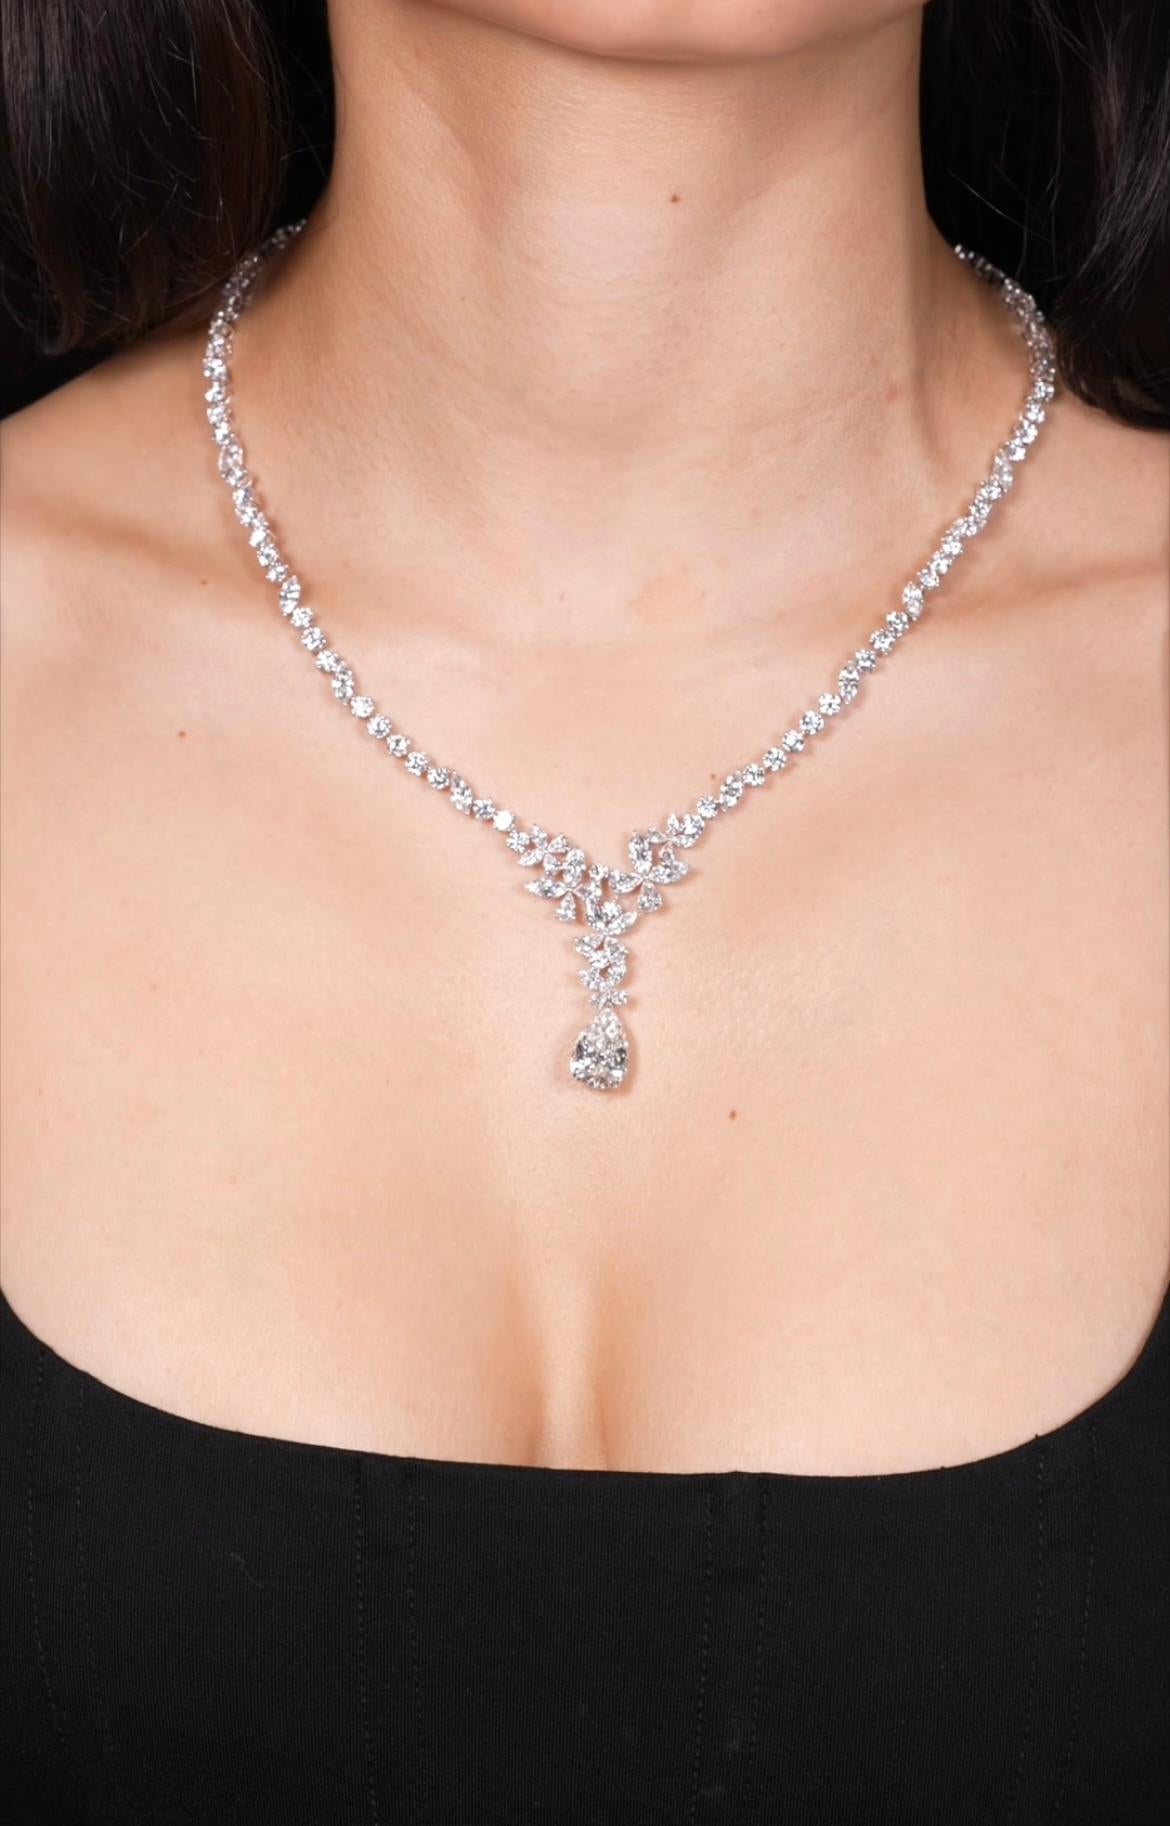 Handmade
Floral Diamond Necklace
18K White Gold
Pear Shape on Bottom is 5.01ct
32.97ct Total Diamond Weight
Designed, Handpicked, & Manufactured From Scratch In Los Angeles Using Only The Finest Materials and Workmanship